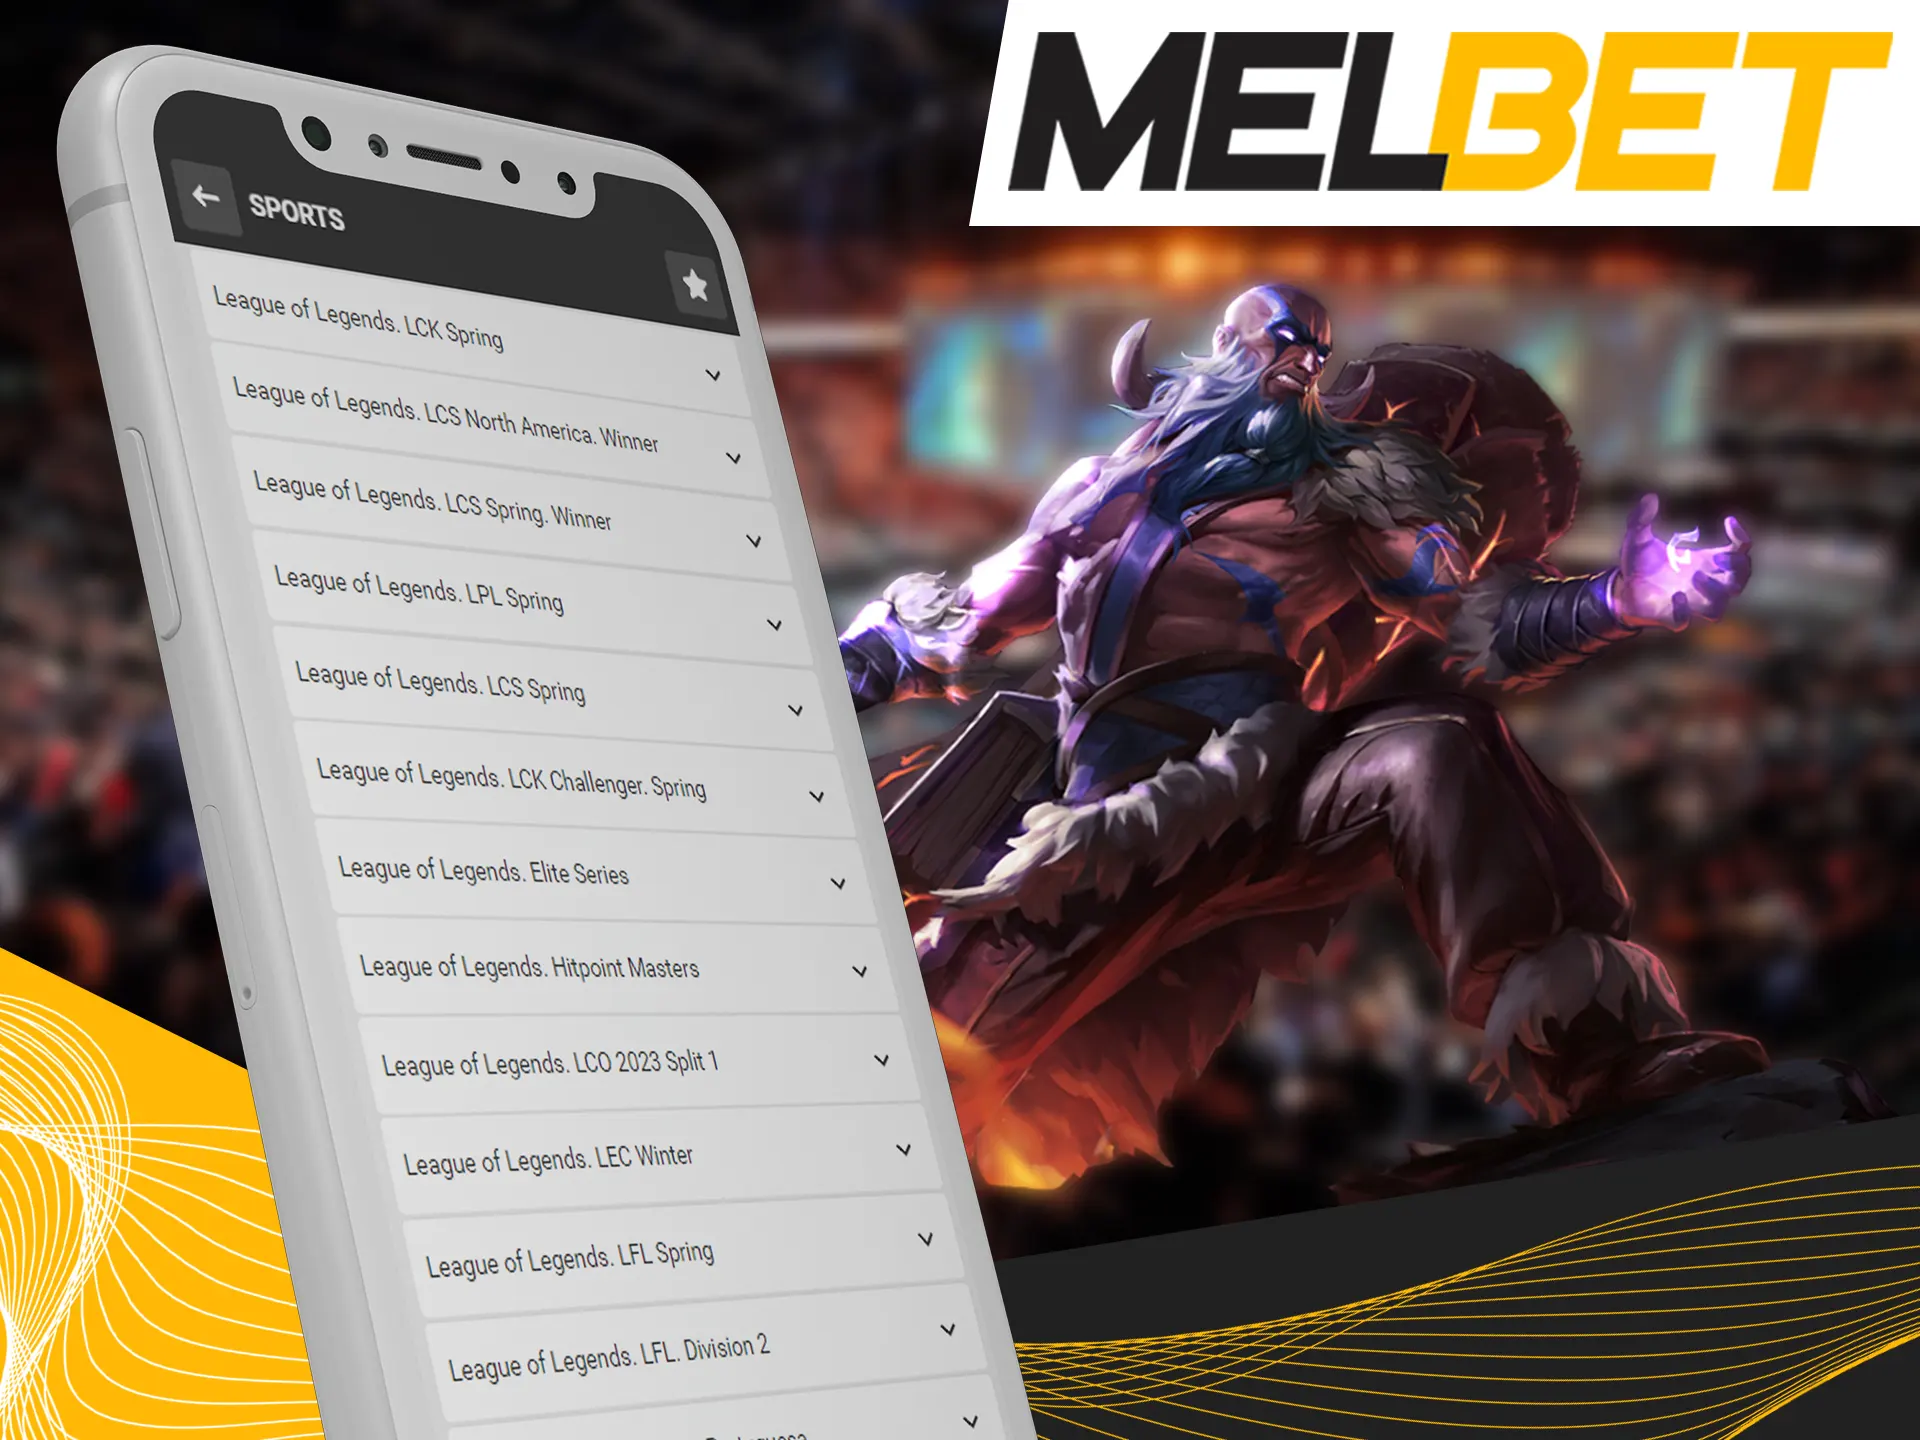 Bet on League of Legends teams and watch tournaments in live at Melbet.